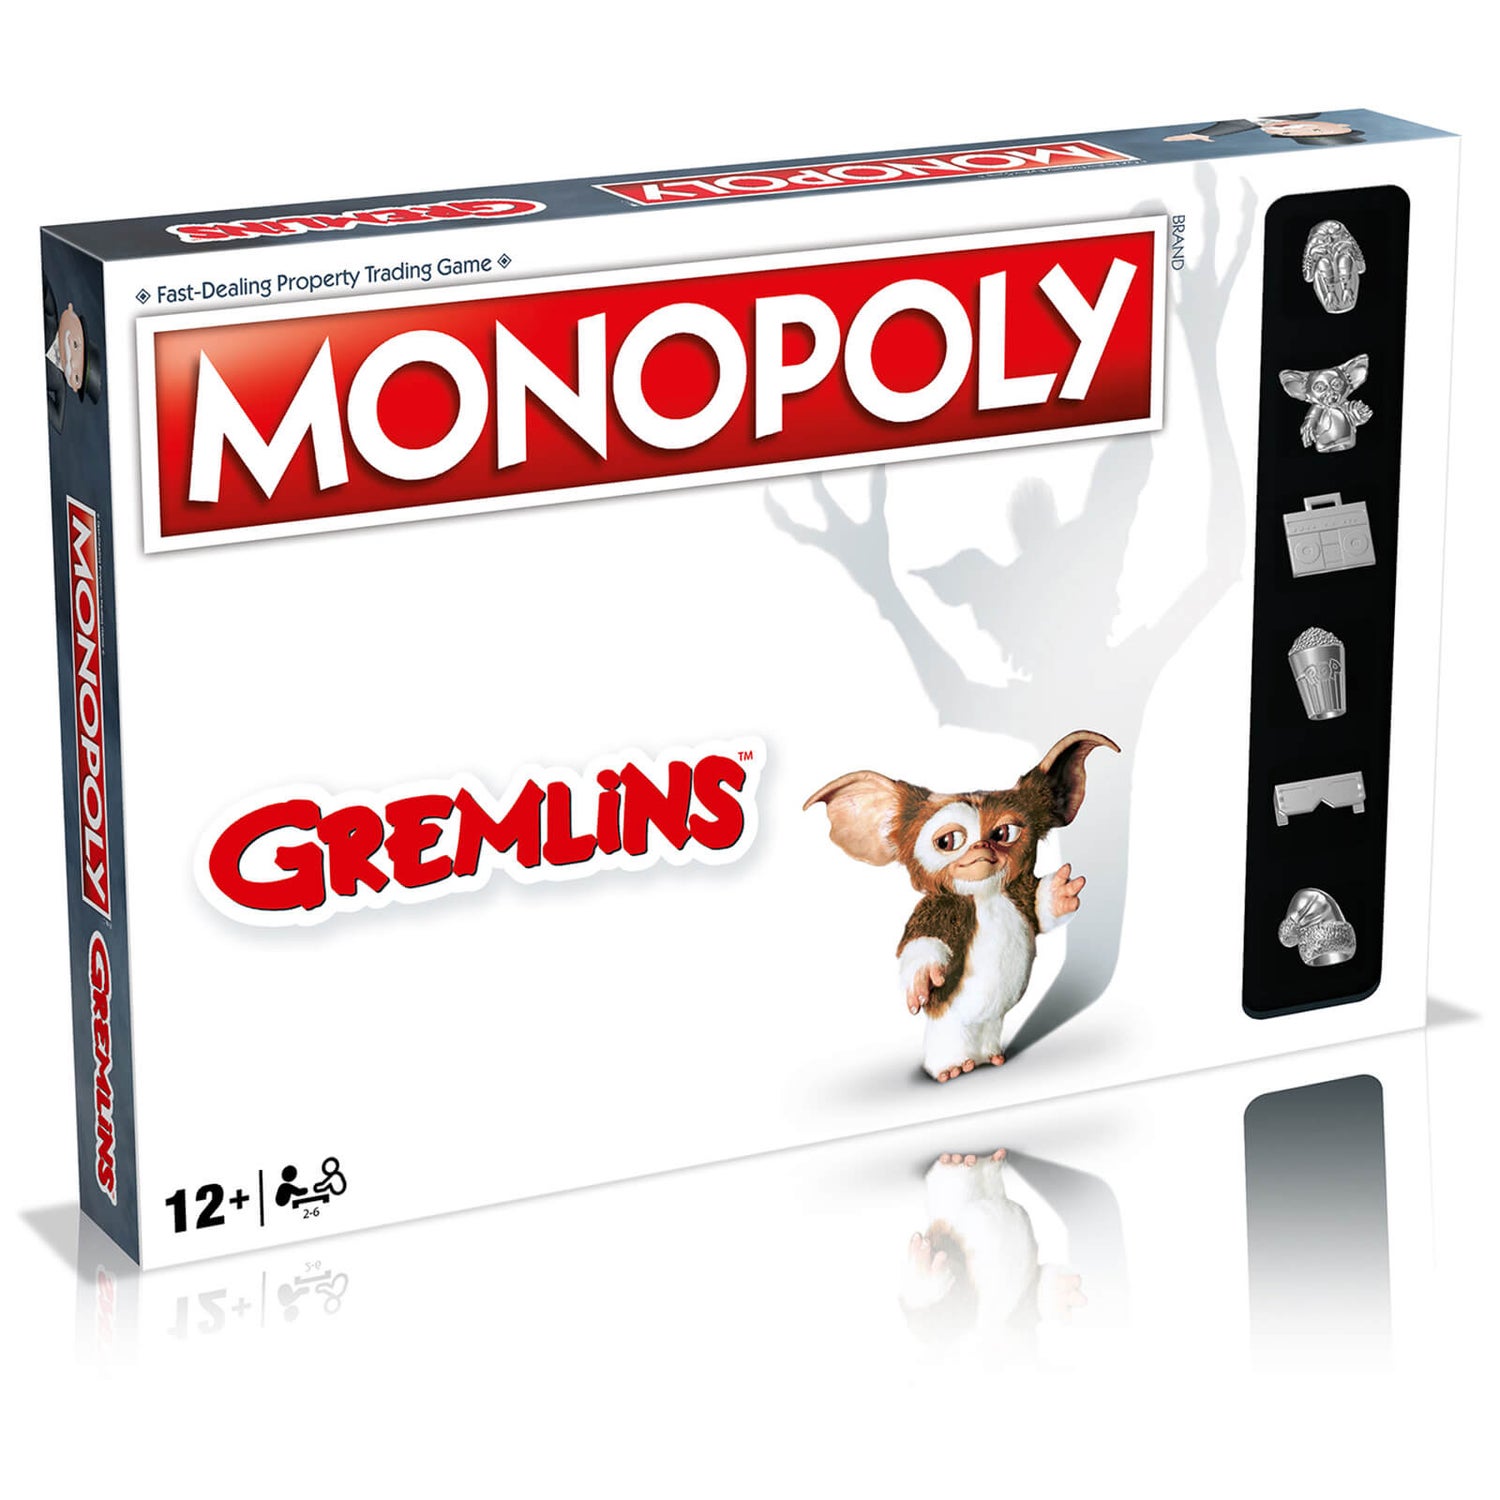 Monopoly Board Game - Gremlins Edition